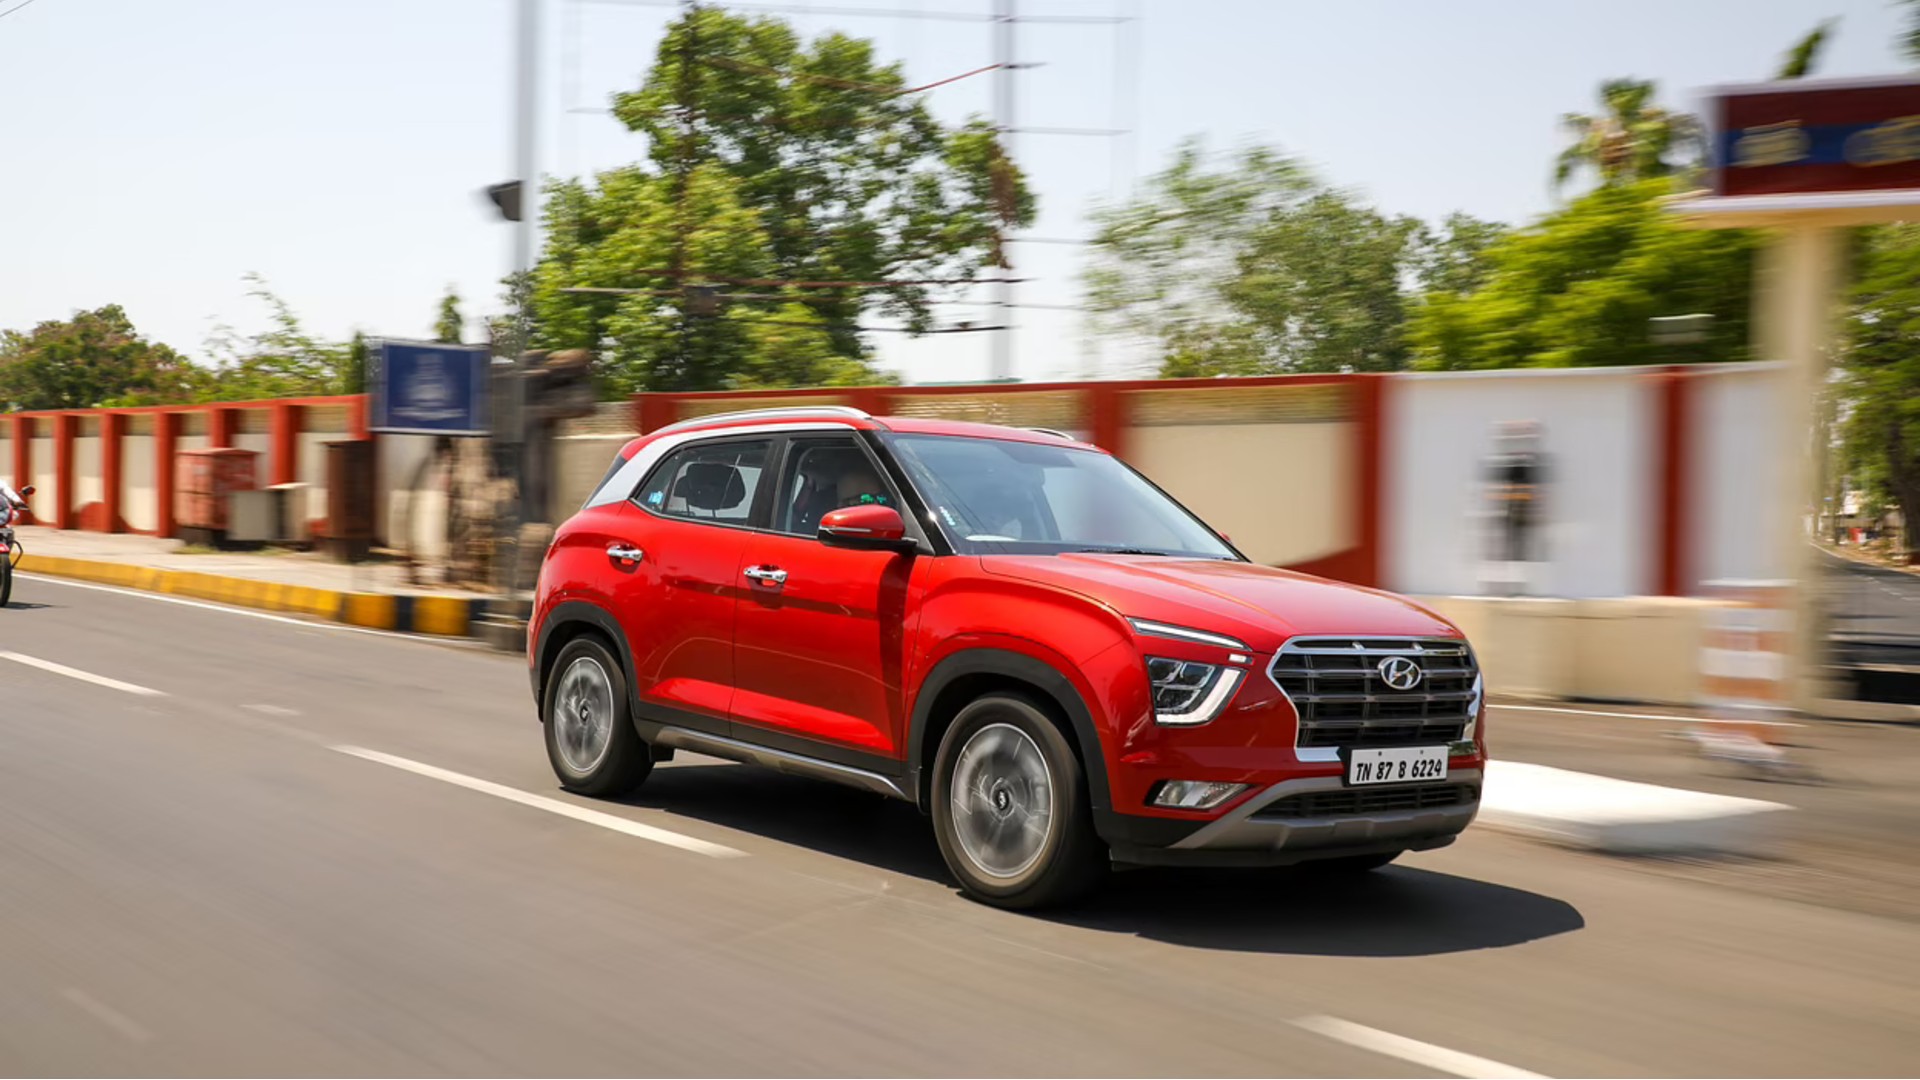 Hyundai Alcazar Bookings Start At Rs 13 Lakh Across India; But Is It Official Booking?